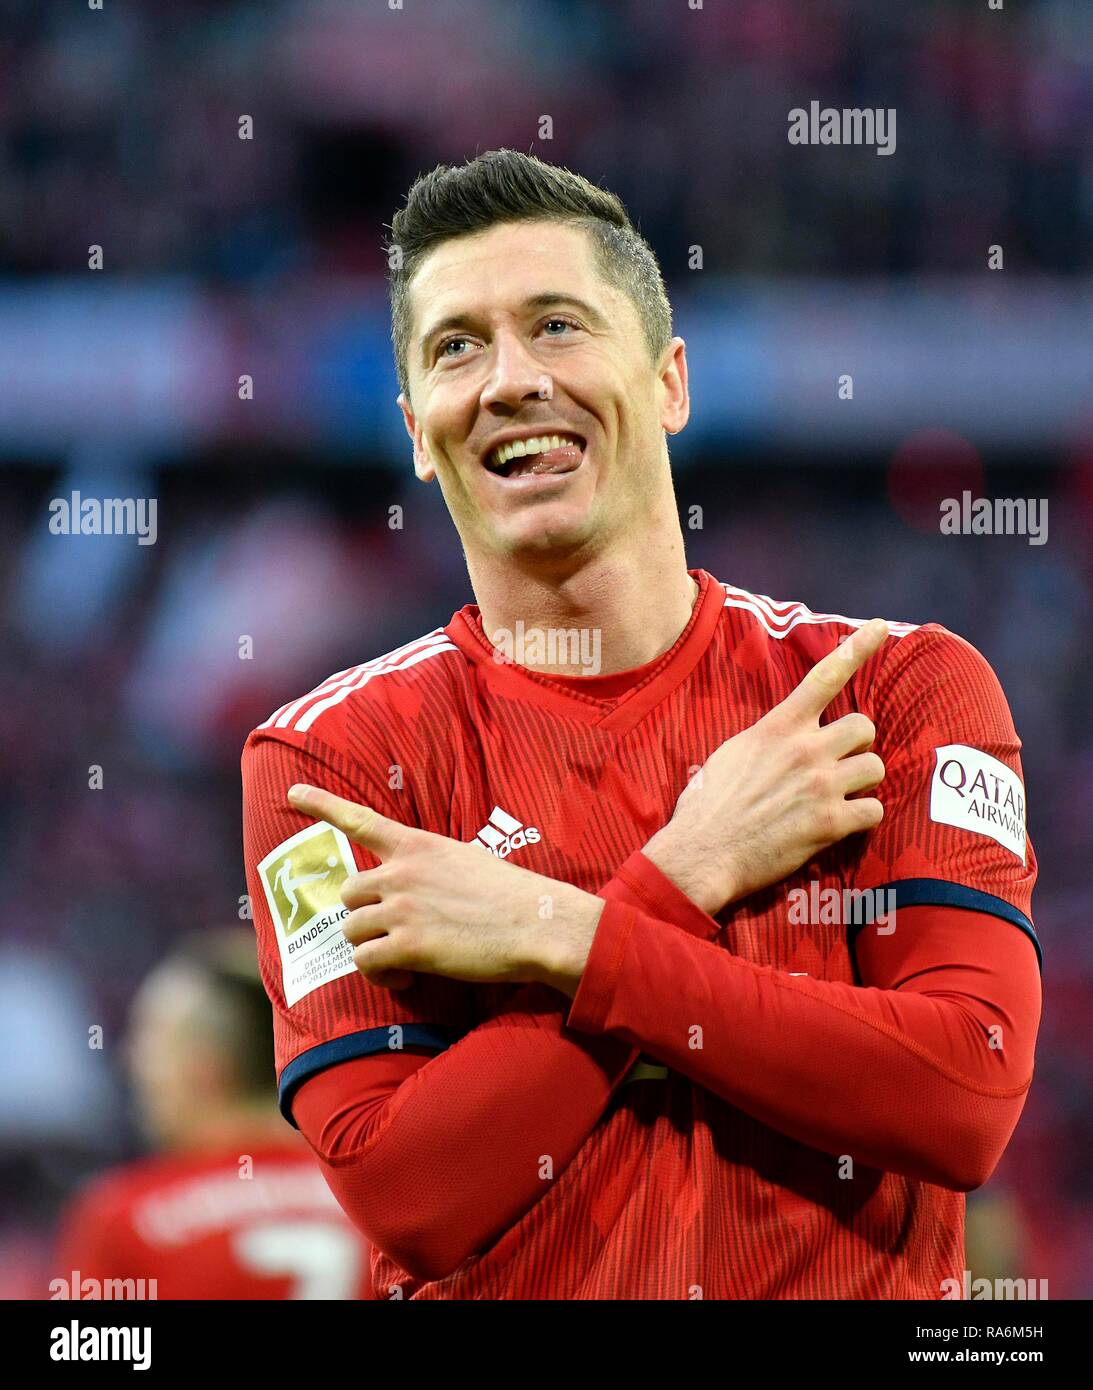 Typical goal celebration with crossed arms and outstretched tongue, Robert Lewandowski, FC Bayern Munich FCB, Allianz Arena Stock Photo